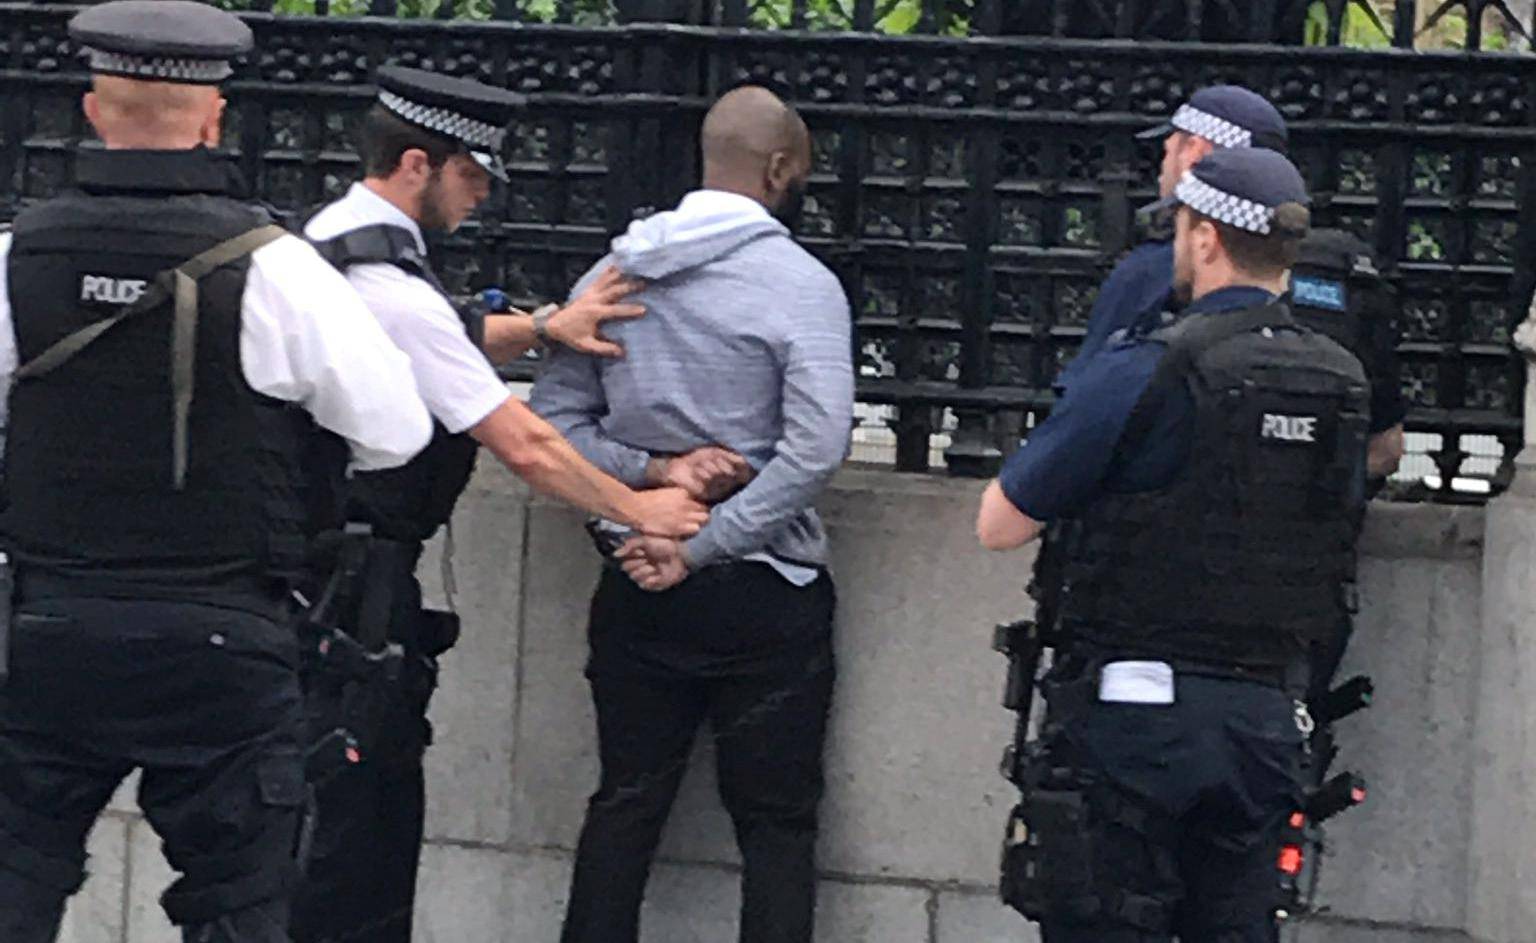 Police officers detain a man outside the Palace of Westminster, in central London